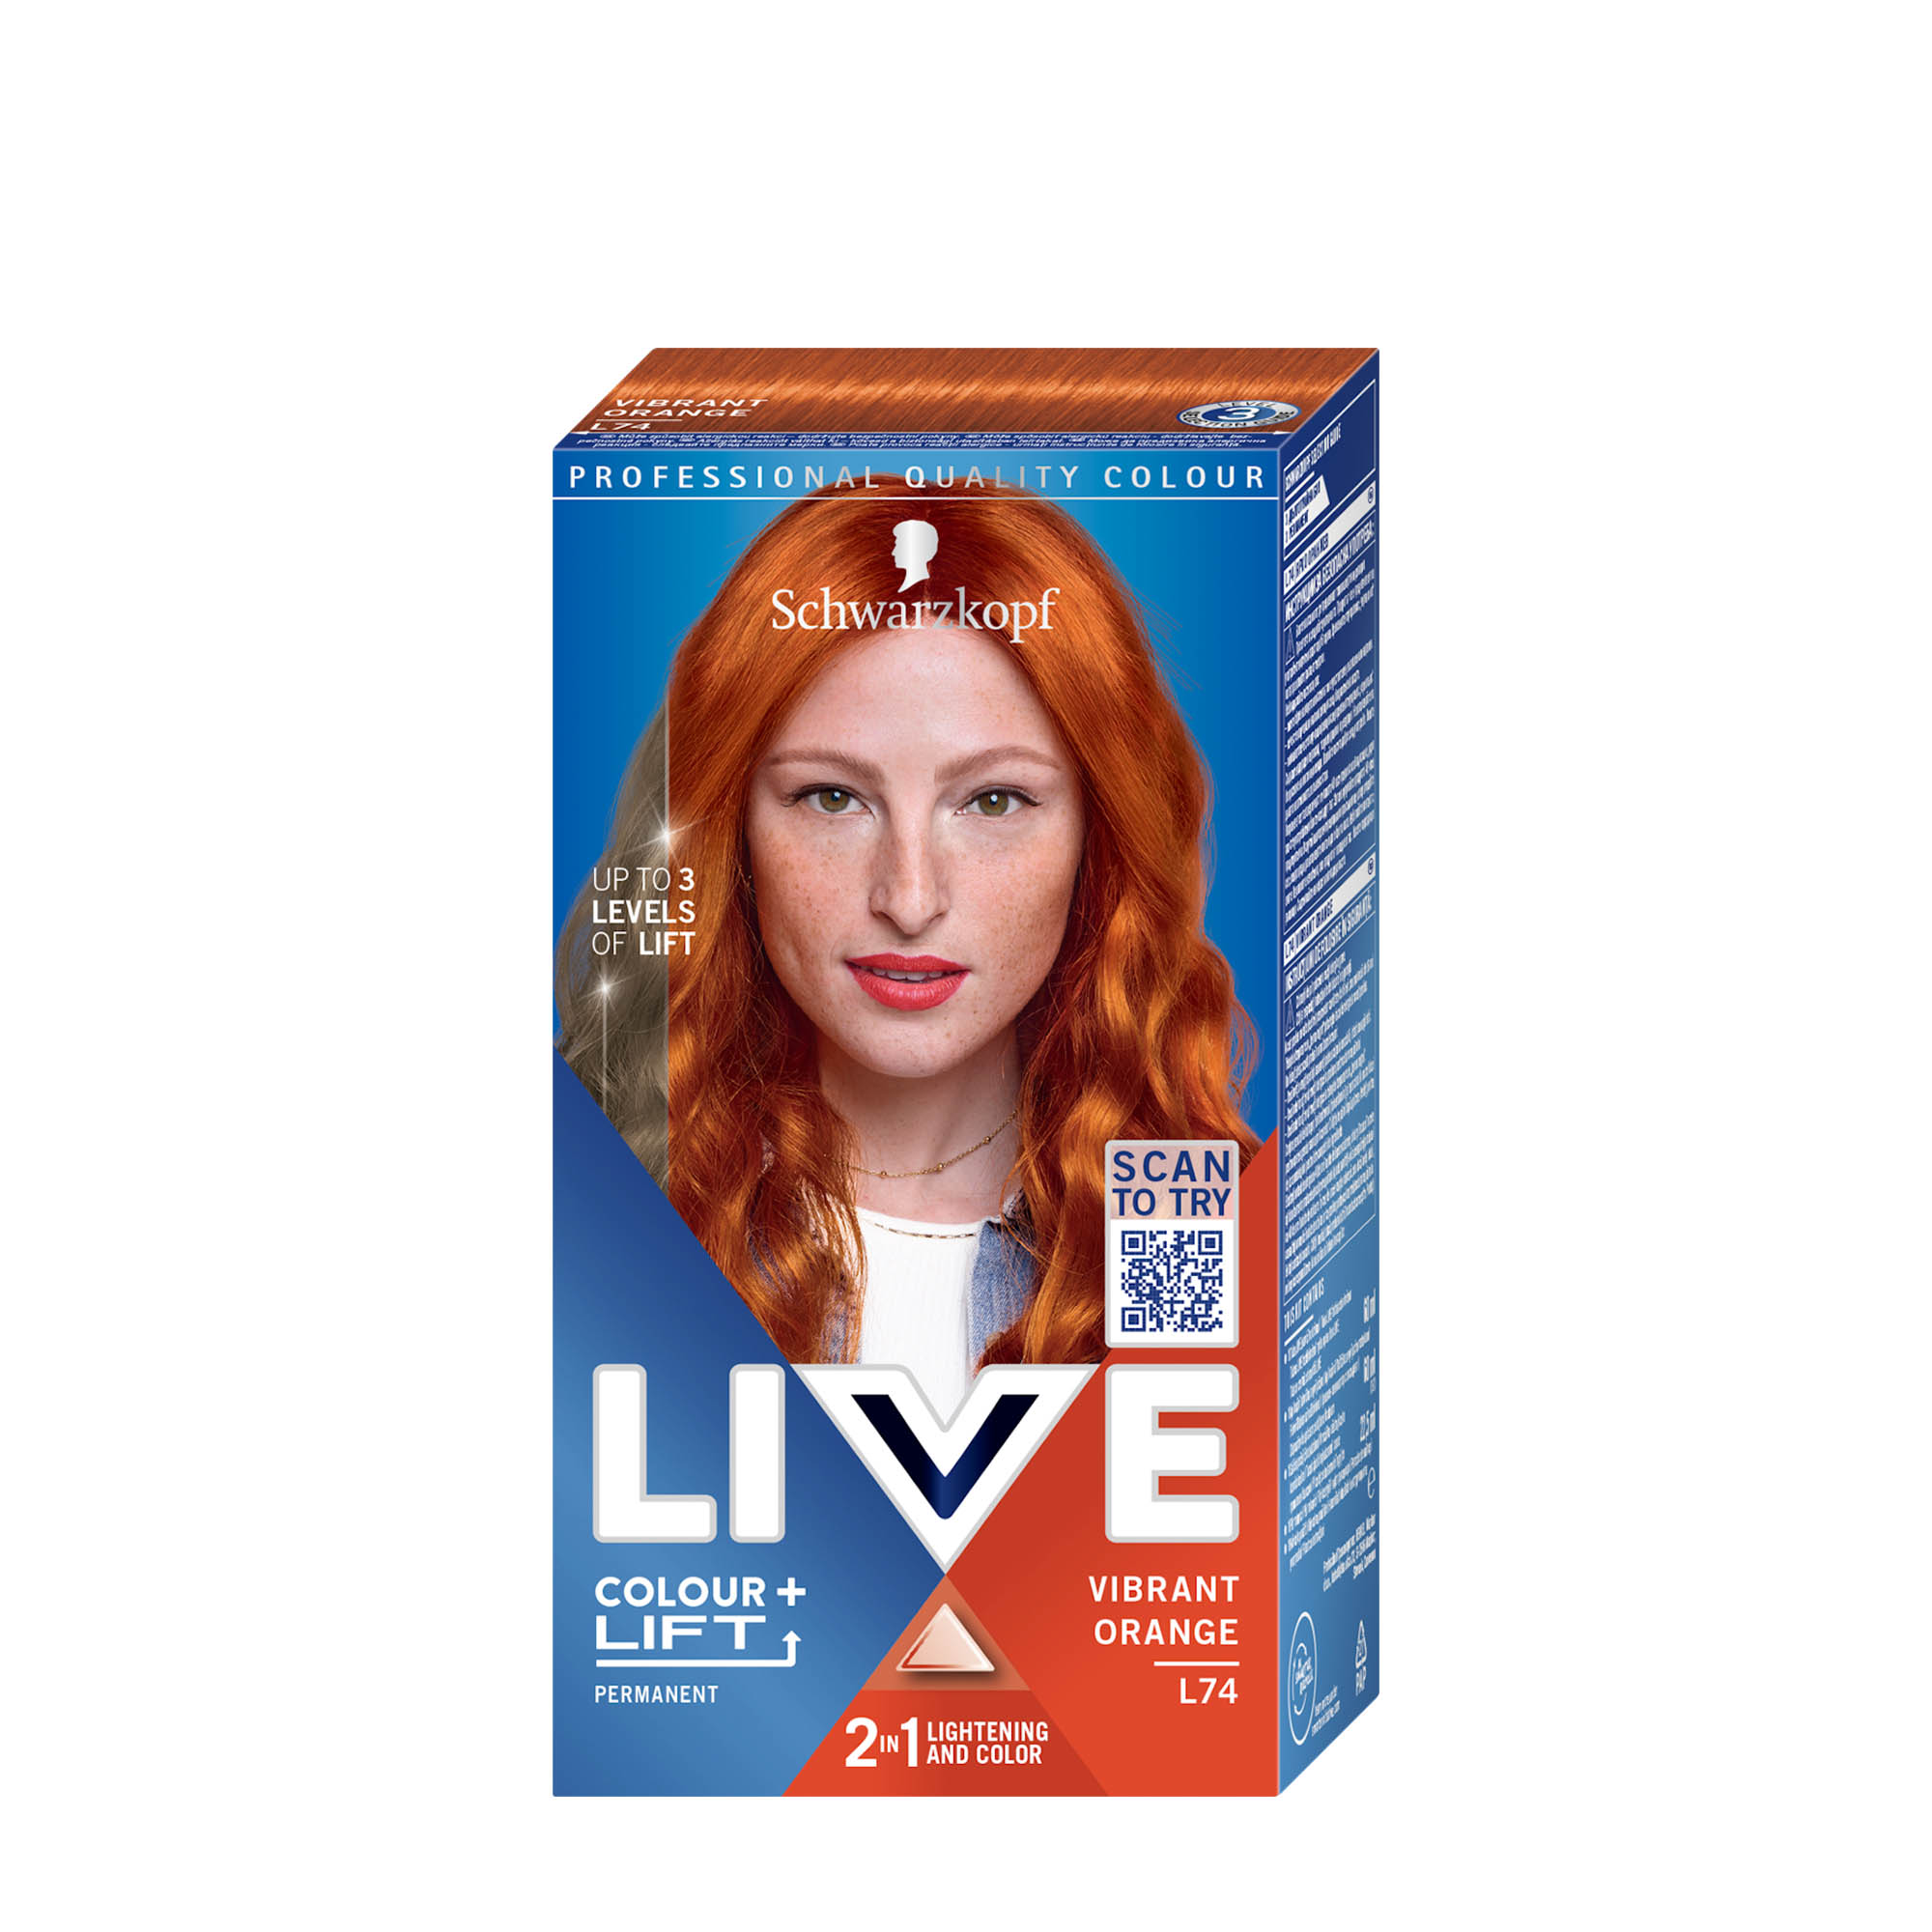 Schwarzkopf Colour Expert Light Brown | everyday-low-prices